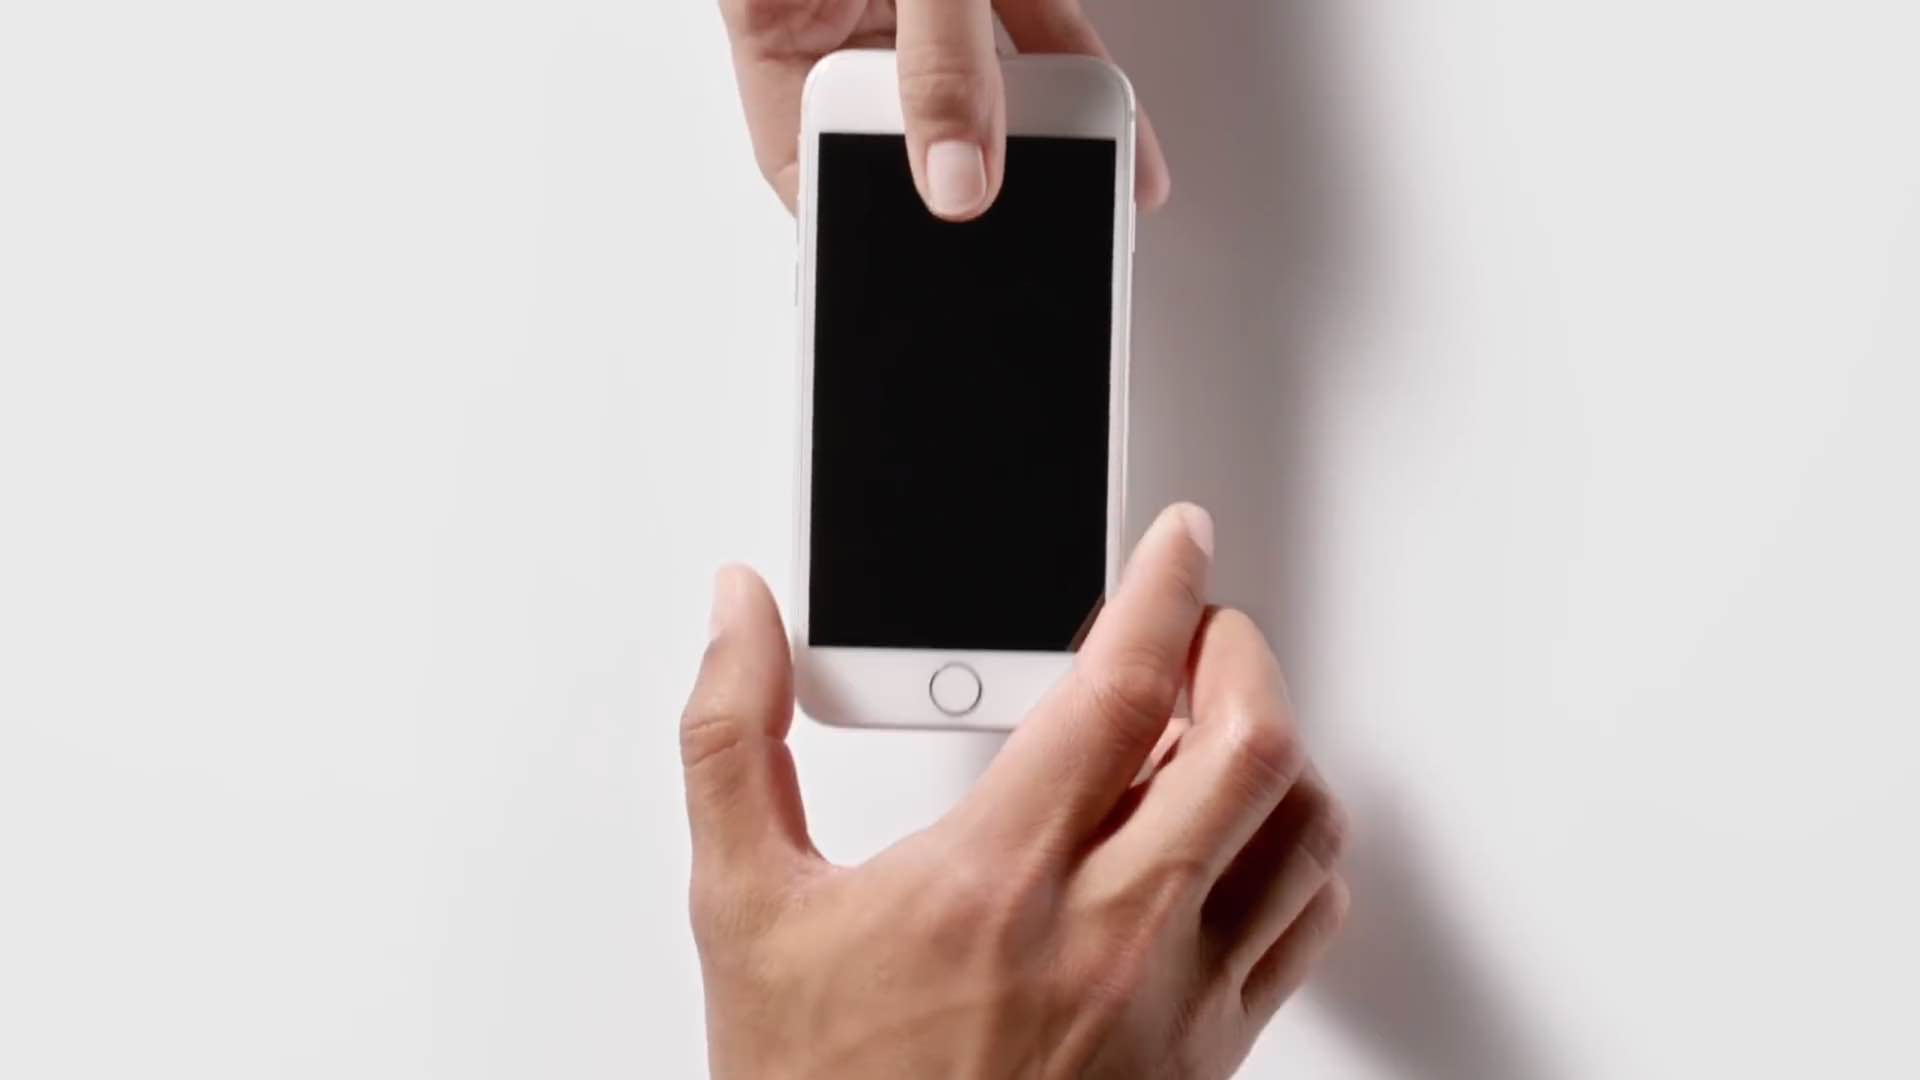  scene from Ap-in ad showing a male hand handing an iPhone 5s over to another male's hand